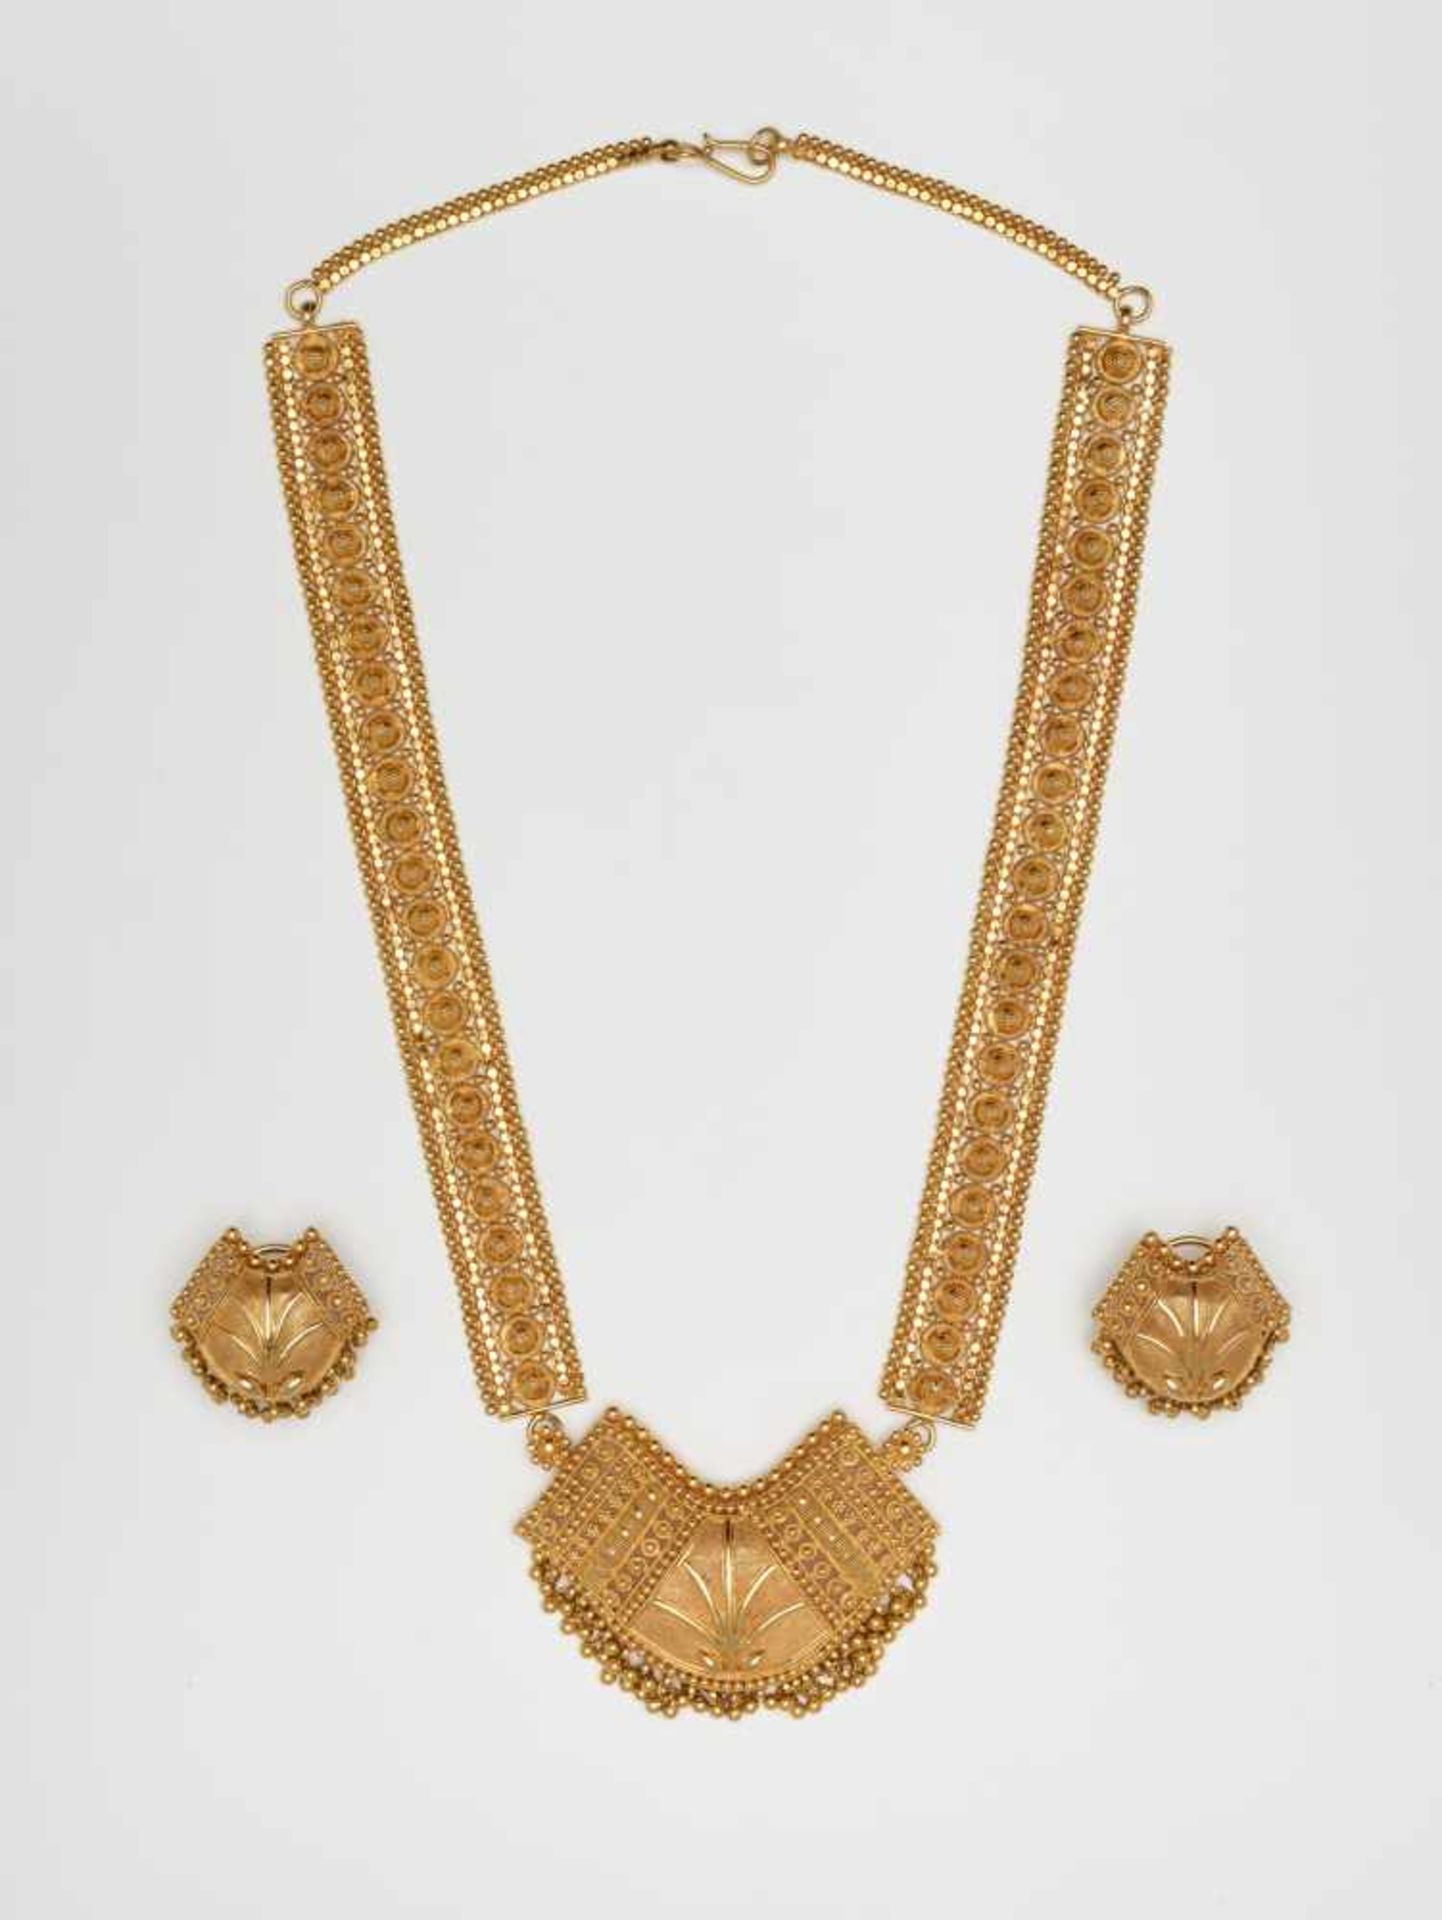 AN ORIENTAL 22 CARAT YELLOW GOLD SET WITH NECKLACE AND EARRINGSIndia1990s, hallmarked ‘22C’ on